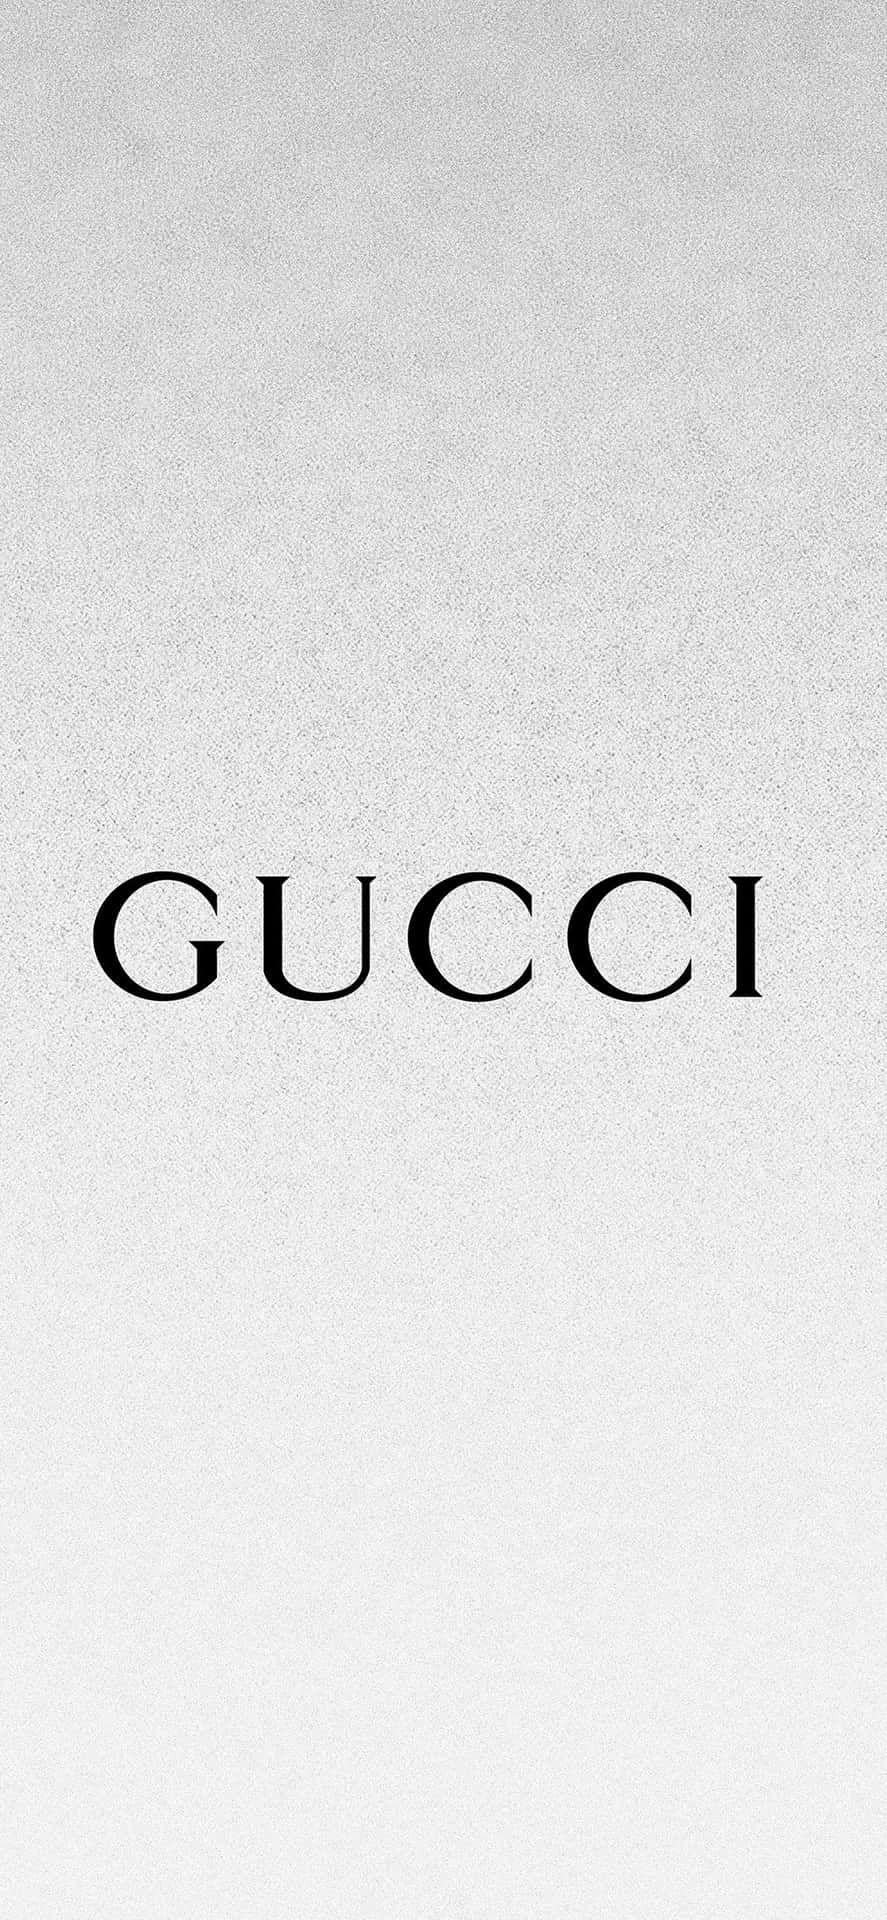 100+] Gucci Backgrounds